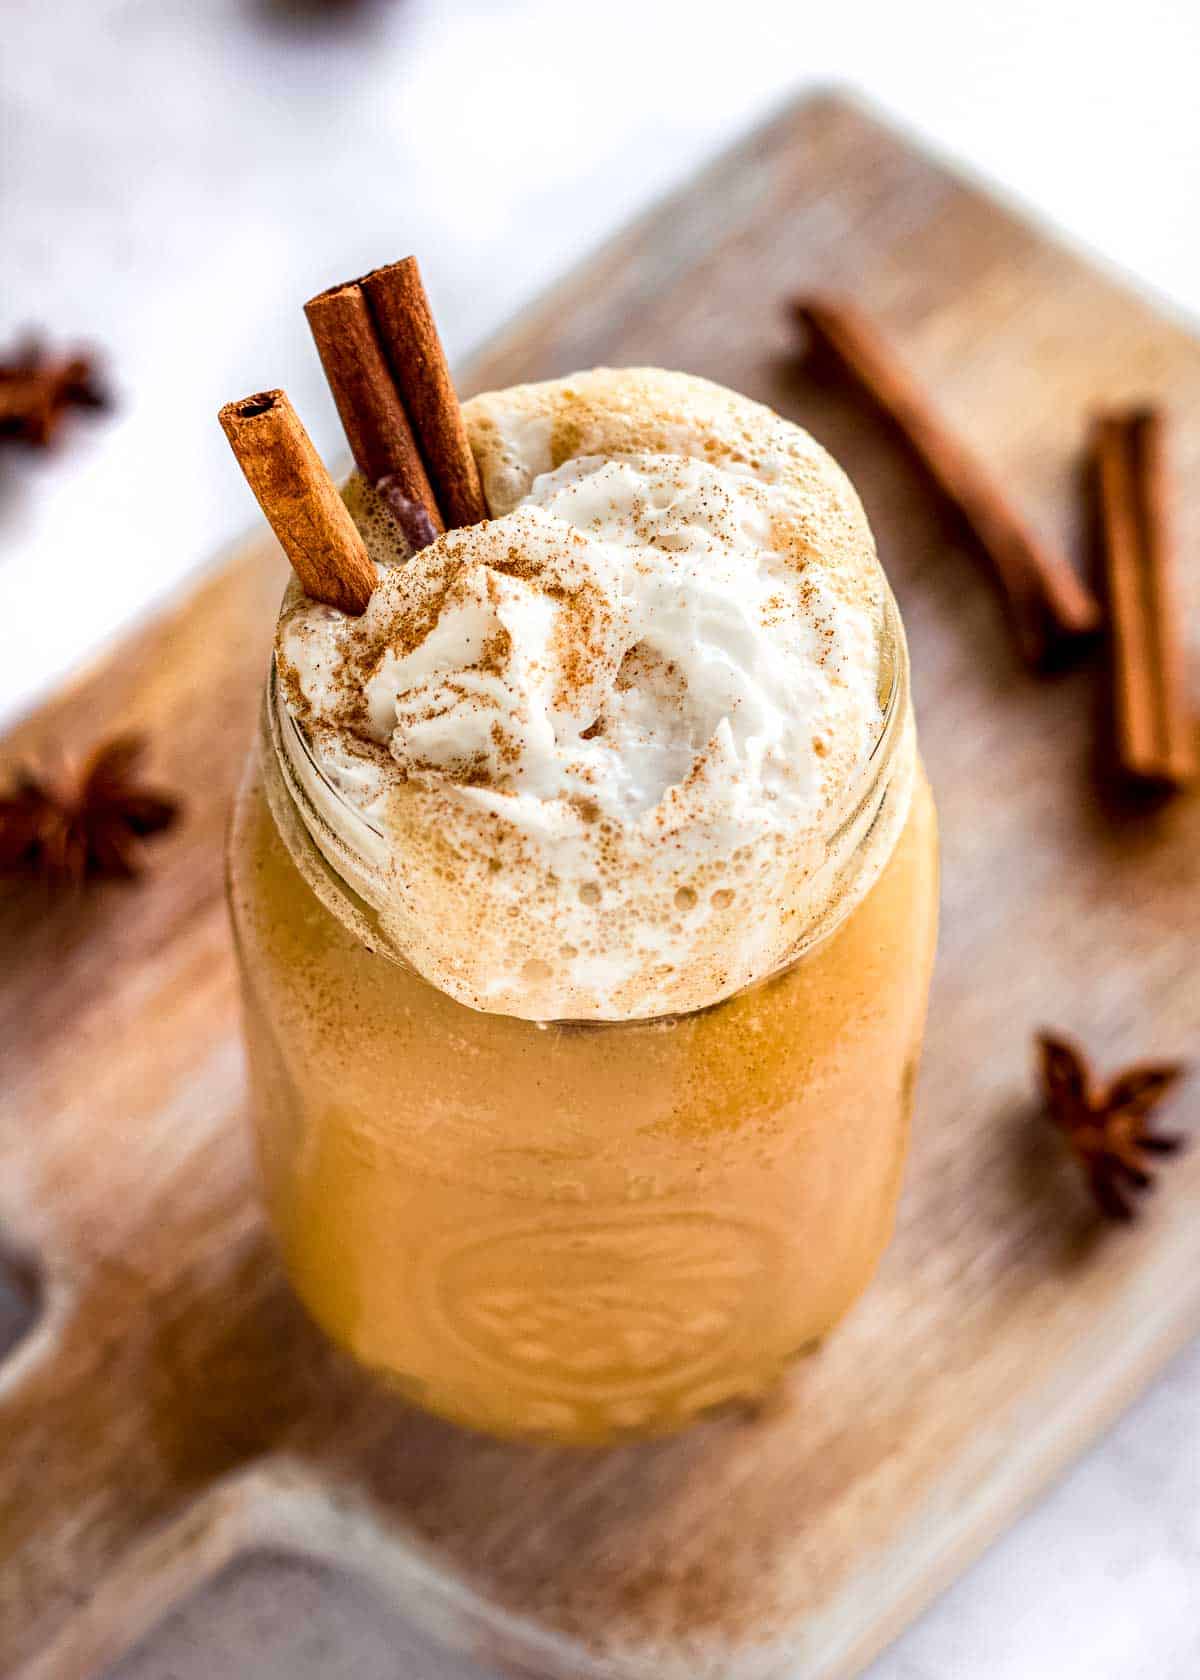 Iced pumpkin spice latte in a glass, topped with coconut whipped cream, cinnamon sticks and pumpkin spice. Cinnamon sticks and star anise are nearby.